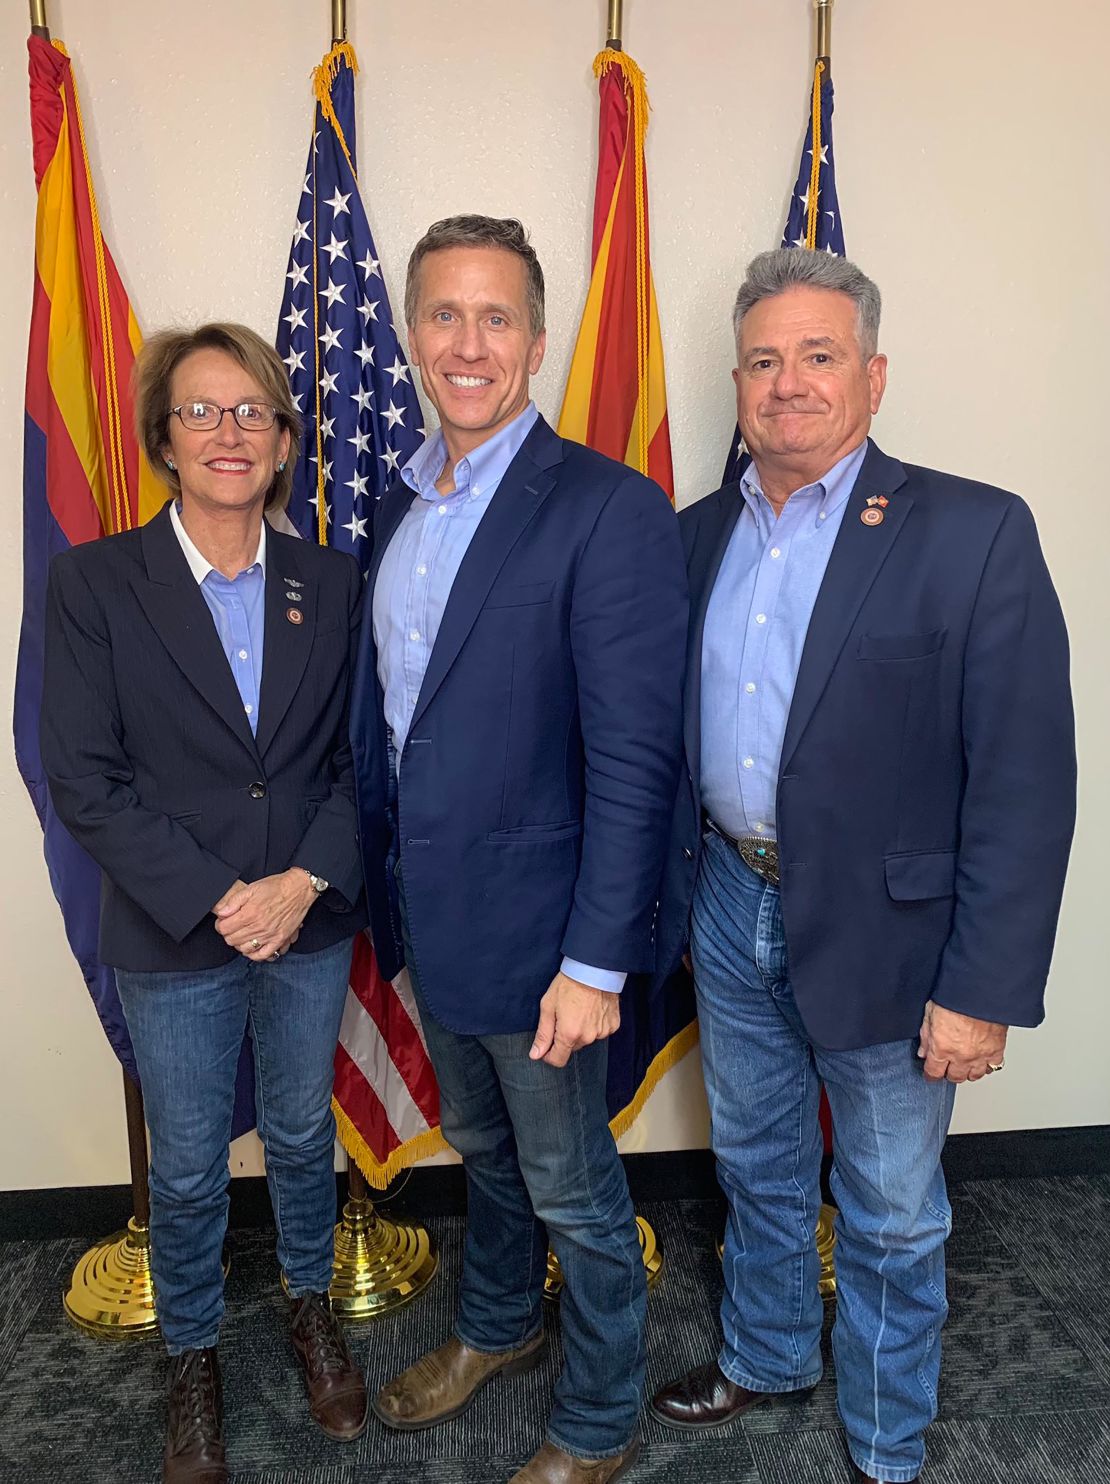 Former Missouri Gov. Eric Greitens, (center) now running for a US Senate seat, poses with Arizona state senators Wendy Rogers and Sonny Borrelli before his June 12 tour of the Arizona Senate's audit site. 